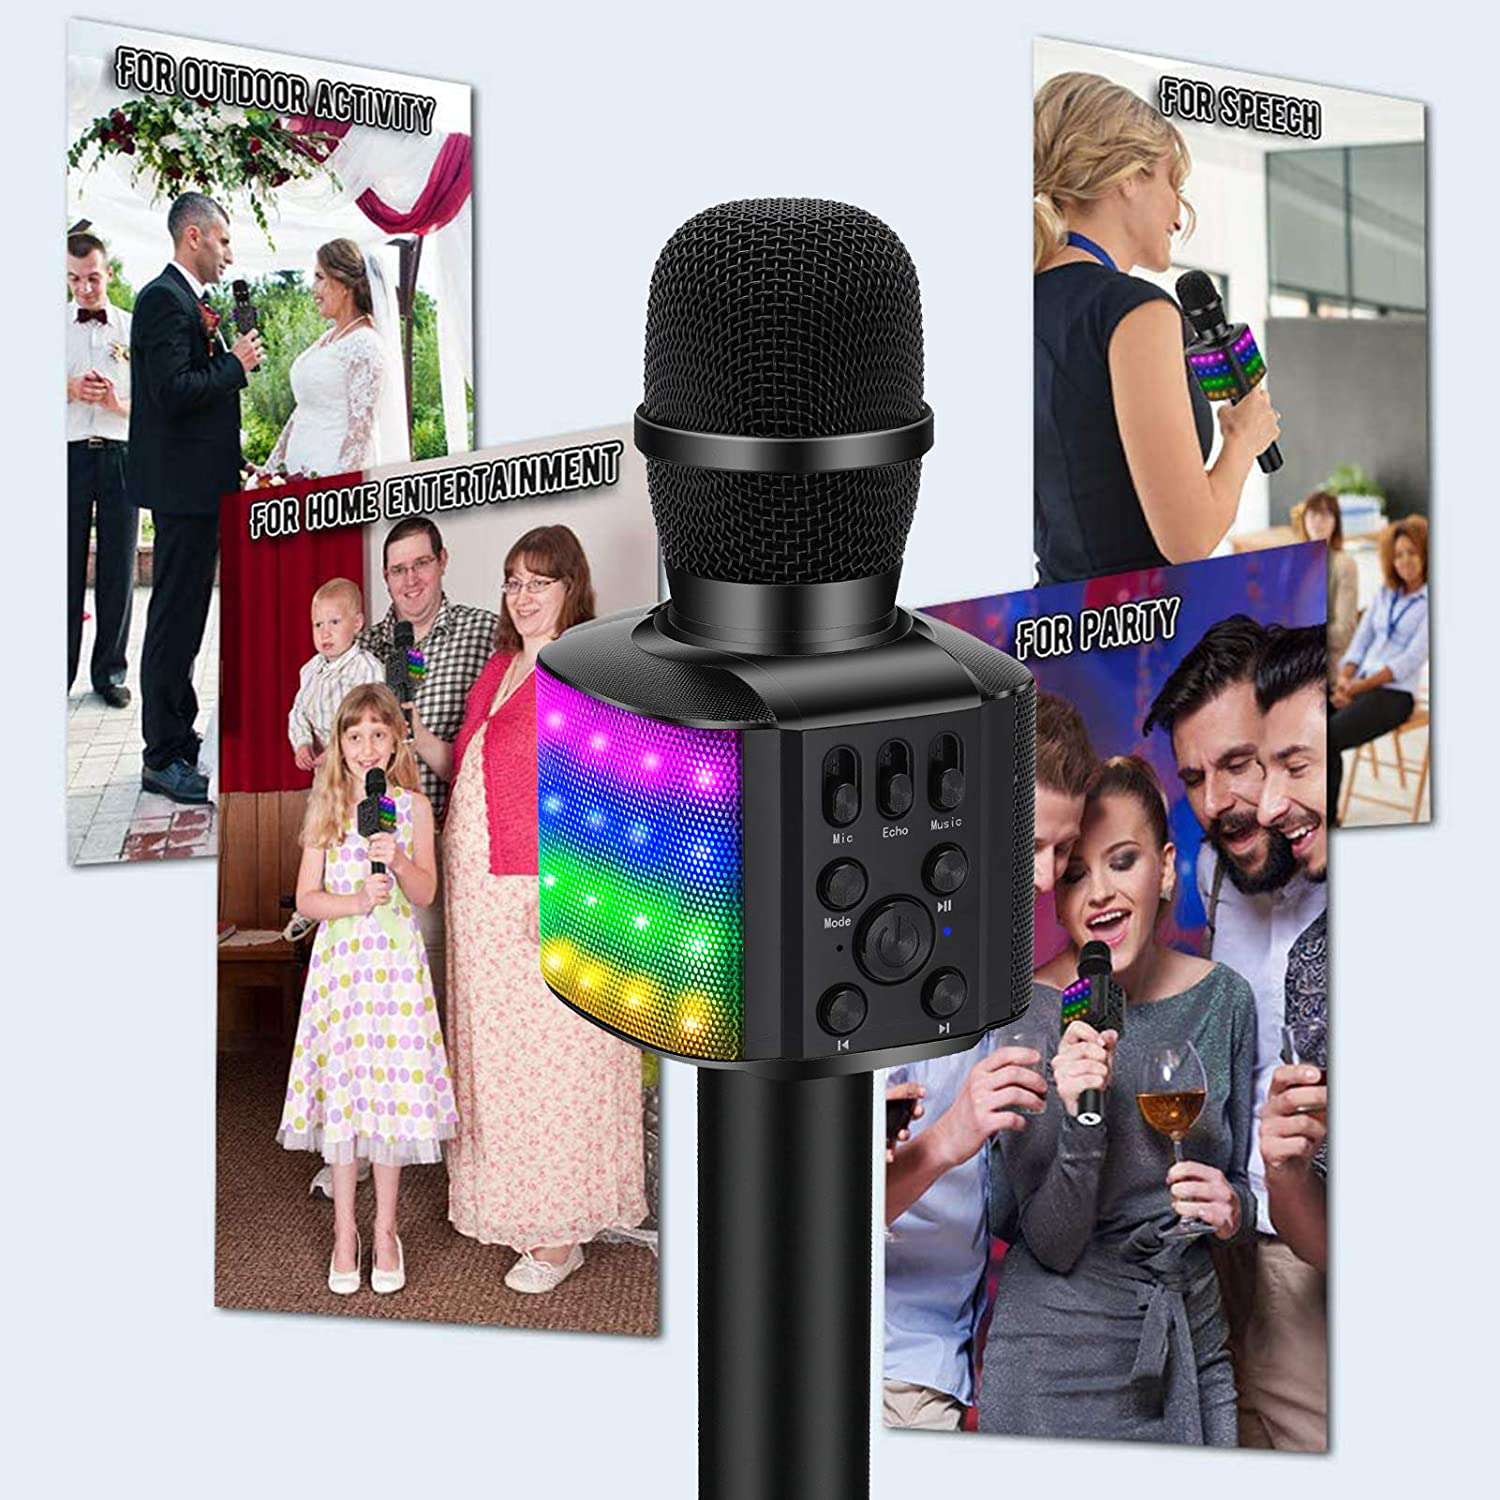 BONAOK Wireless Bluetooth Karaoke Microphone with controllable LED Lights, 4 in 1 Portable Karaoke Machine Mic Speaker Birthday Home Party for All Smartphones PC(Q36 Gold)